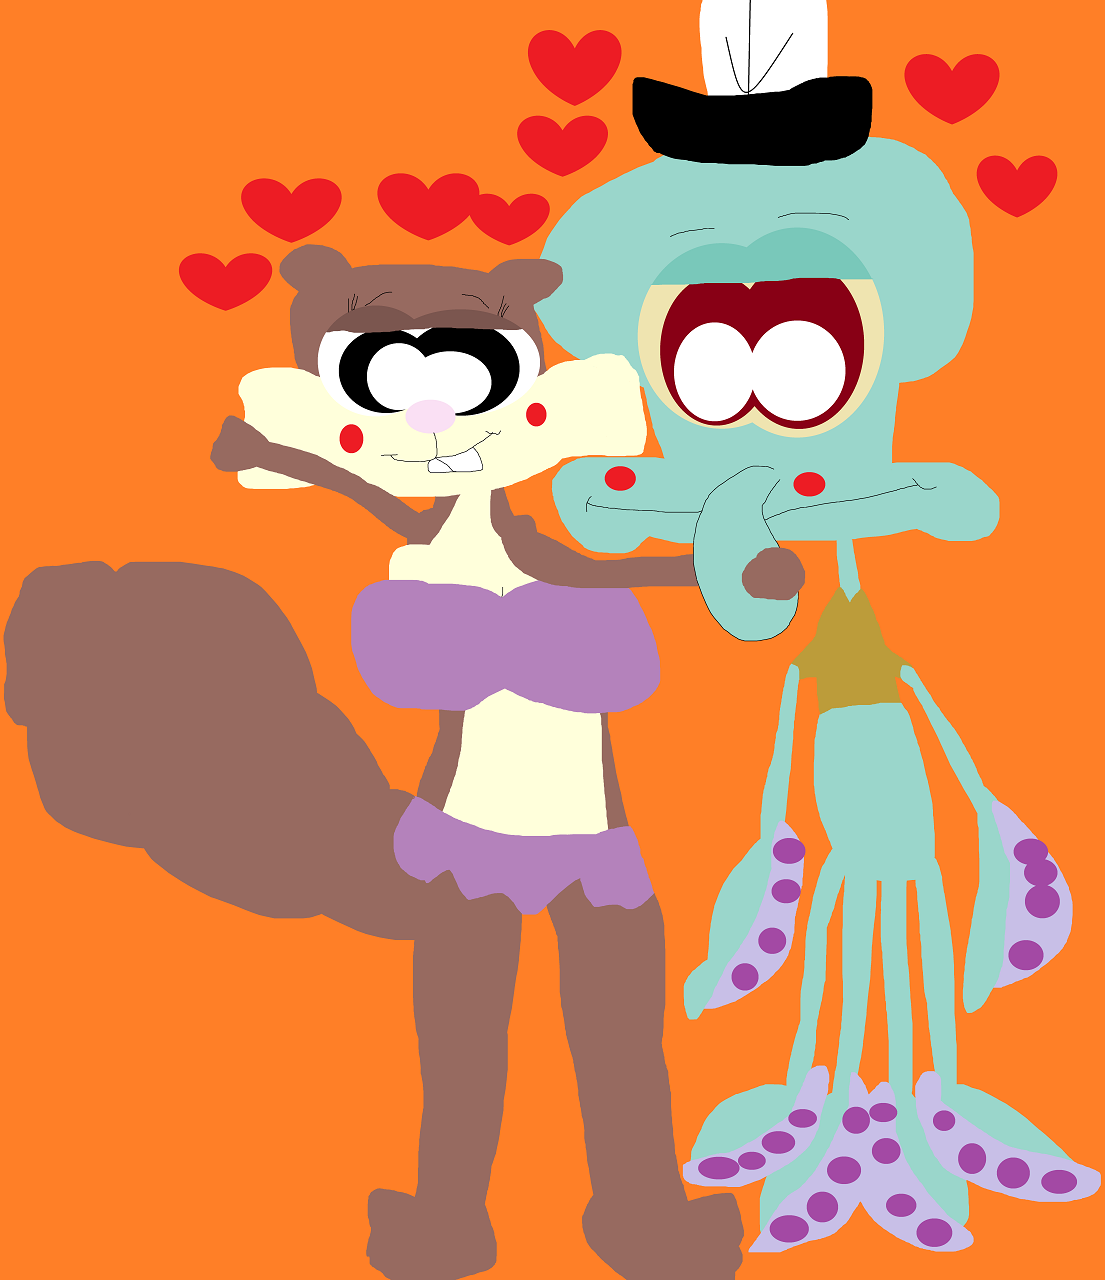 Just A Random Sandy About To Kiss Squidward by Falconlobo